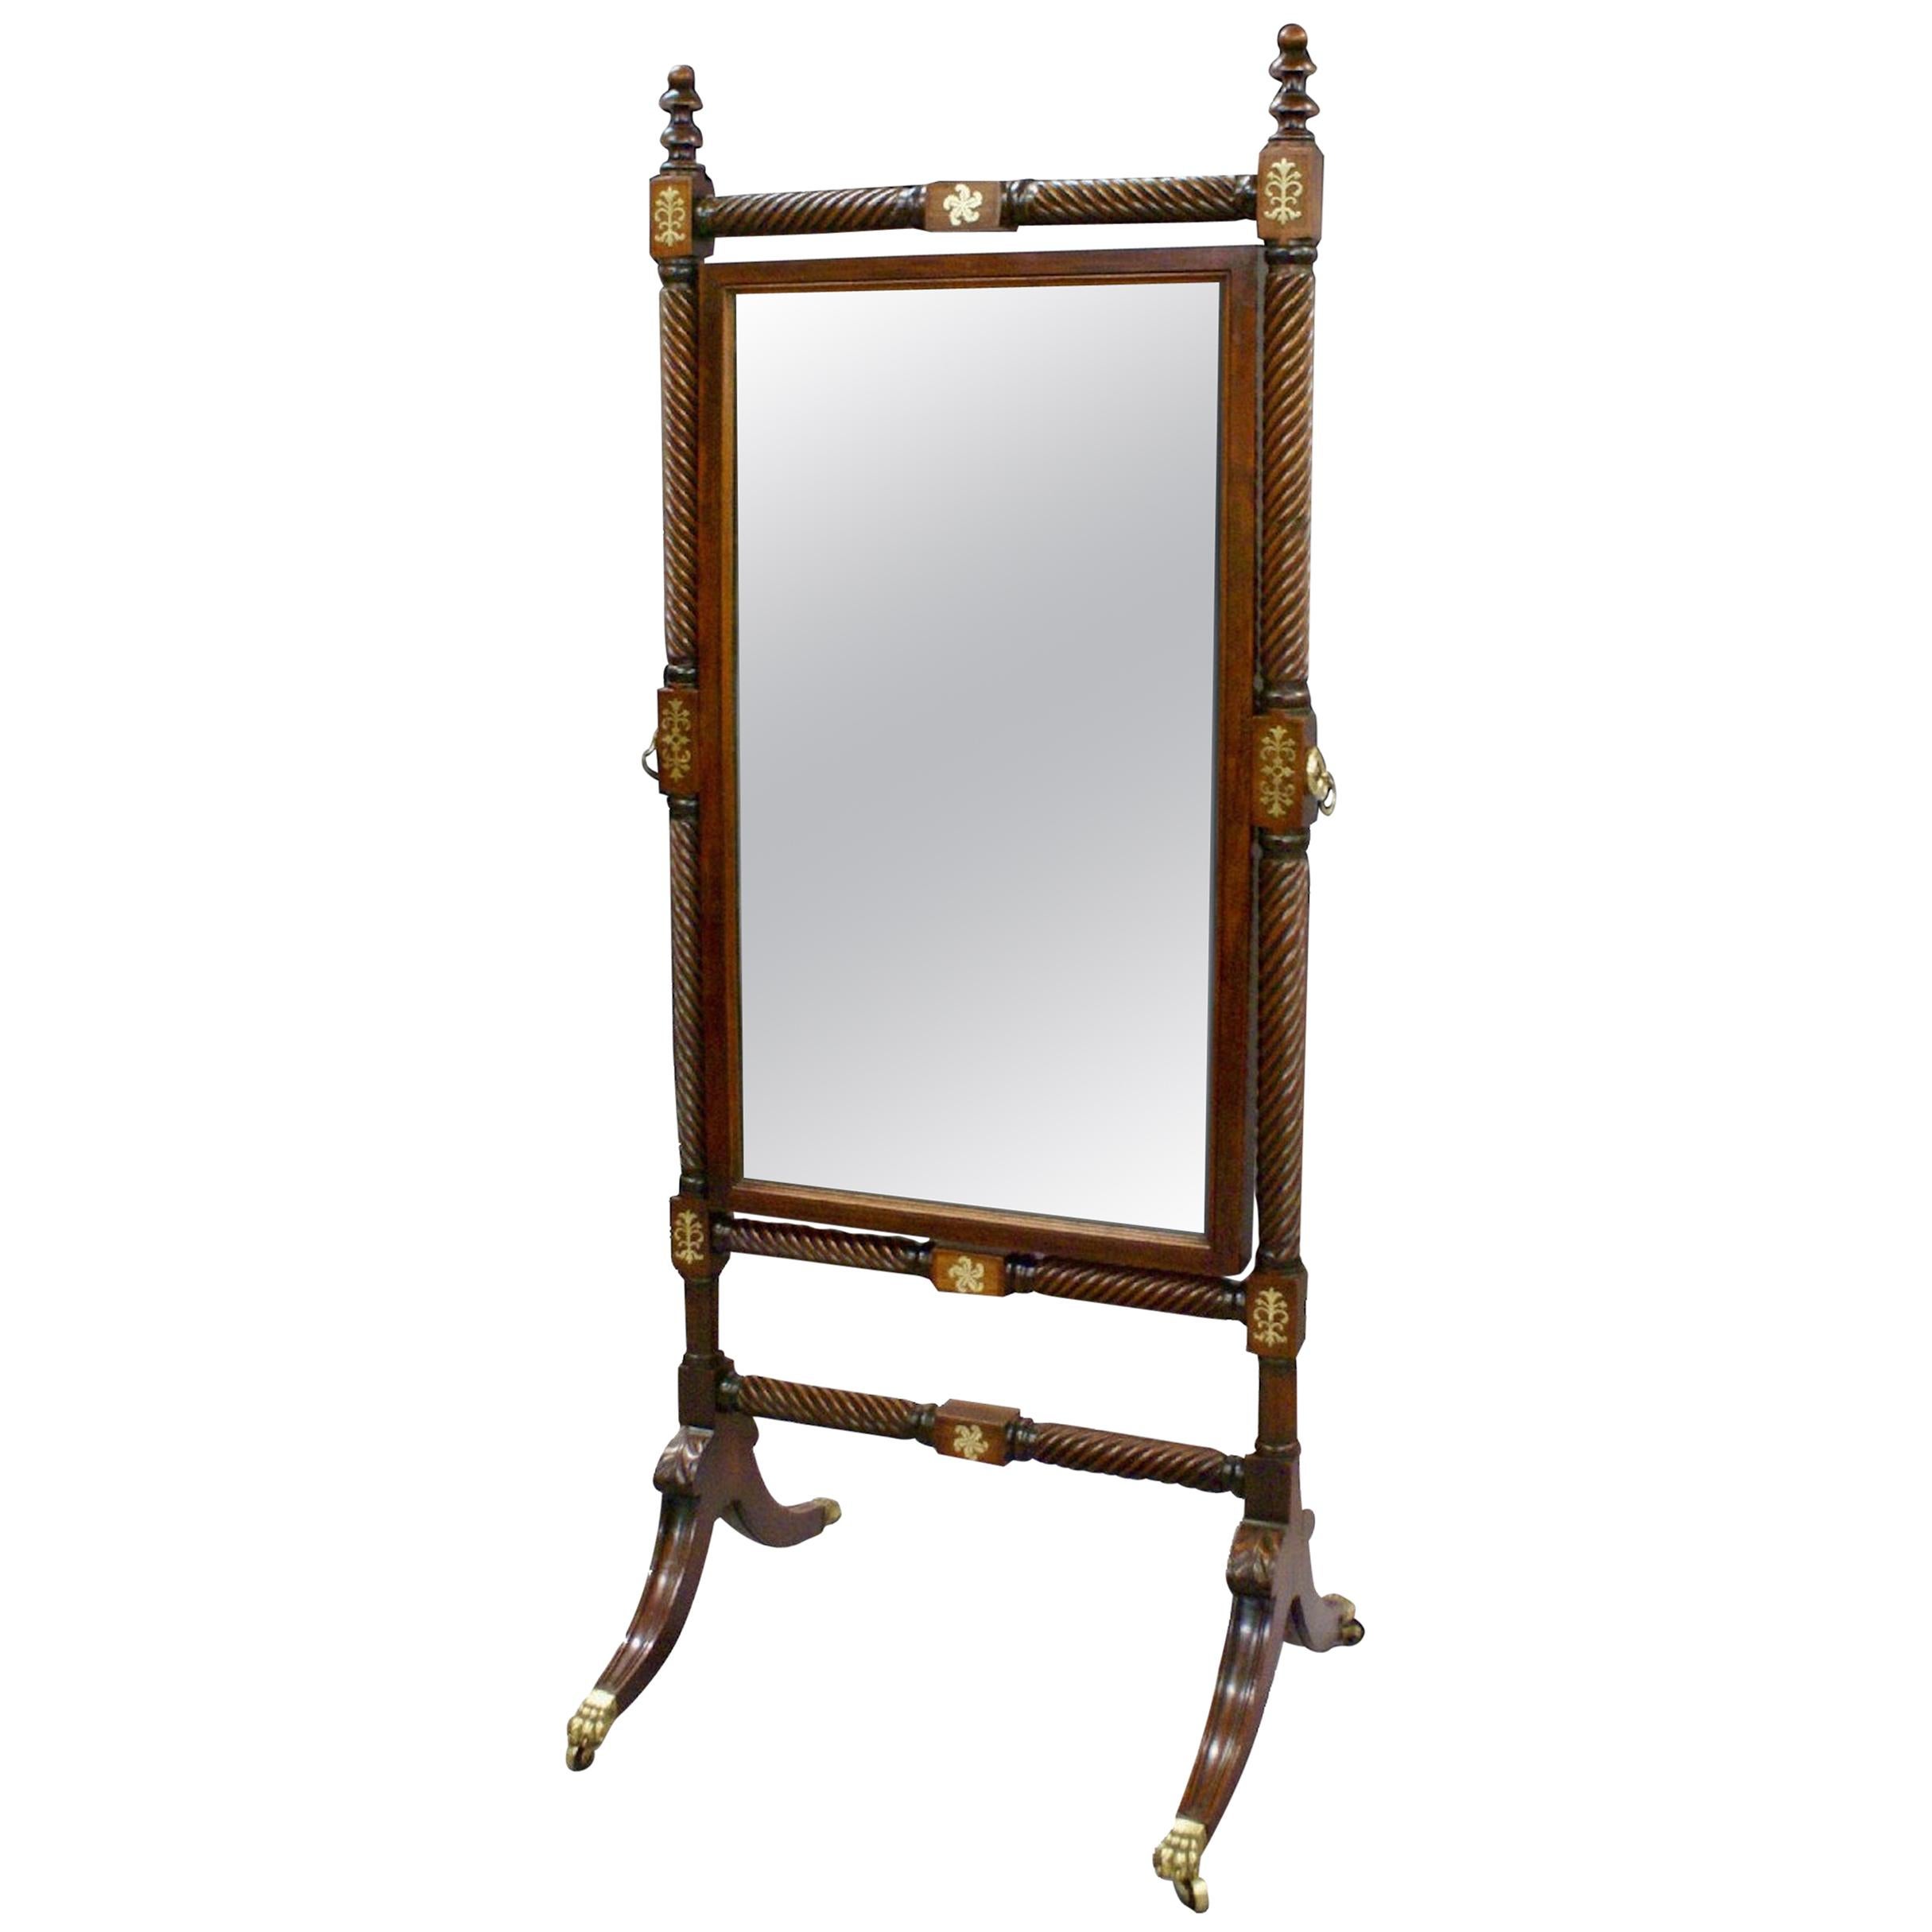 Early 19th Century Rosewood Cheval Mirror with Original Mirror